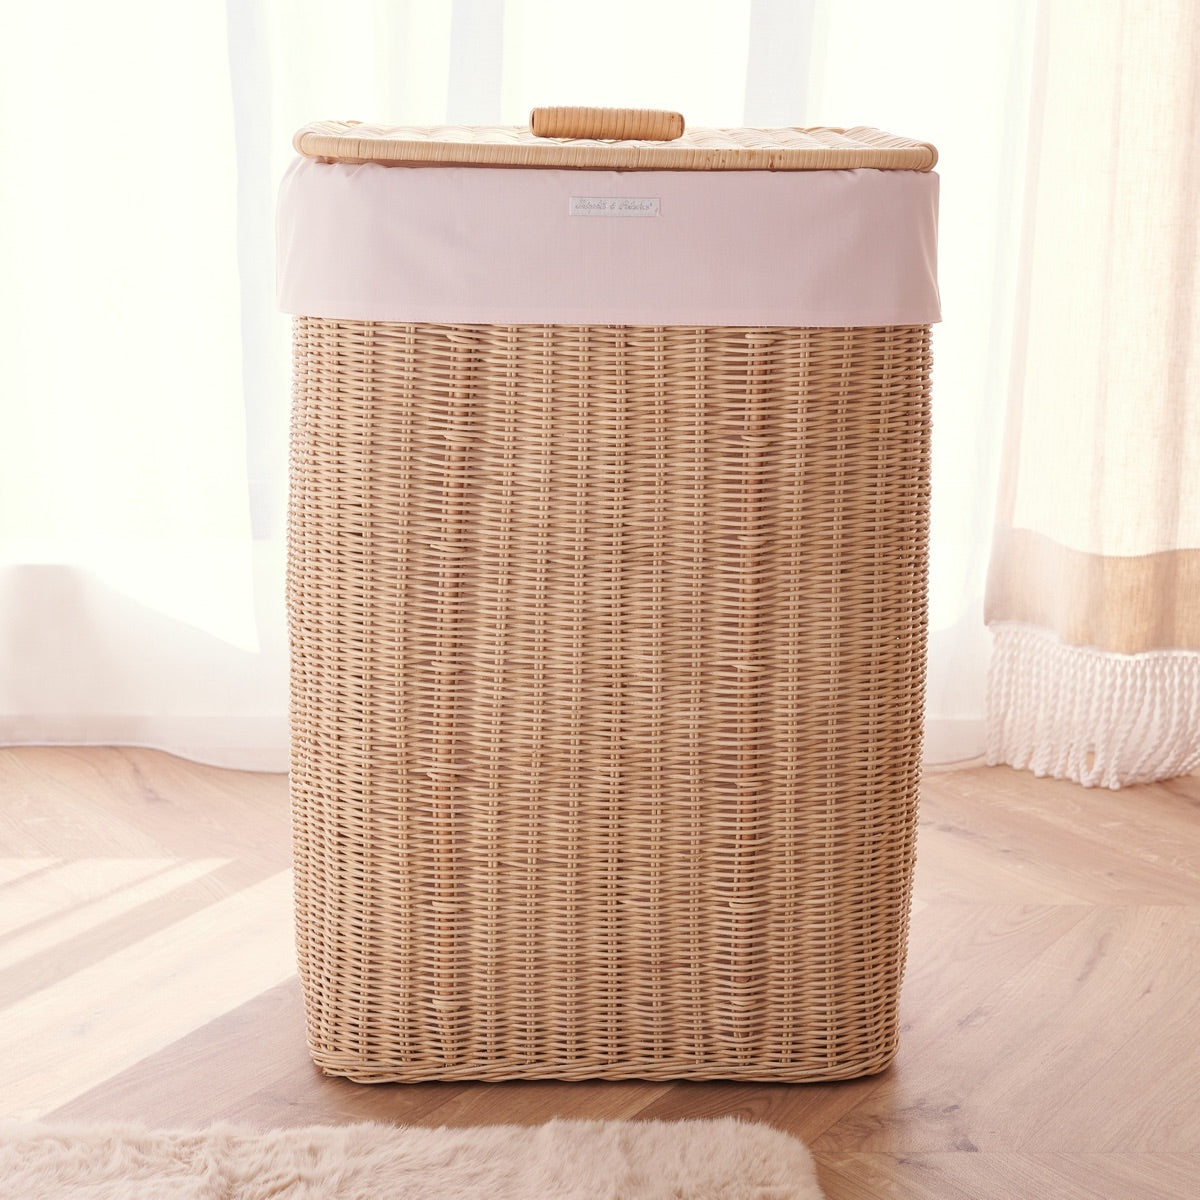 Theophile & Patachou Rectangular Natural Wicker Basket and Cover - Cotton Pink